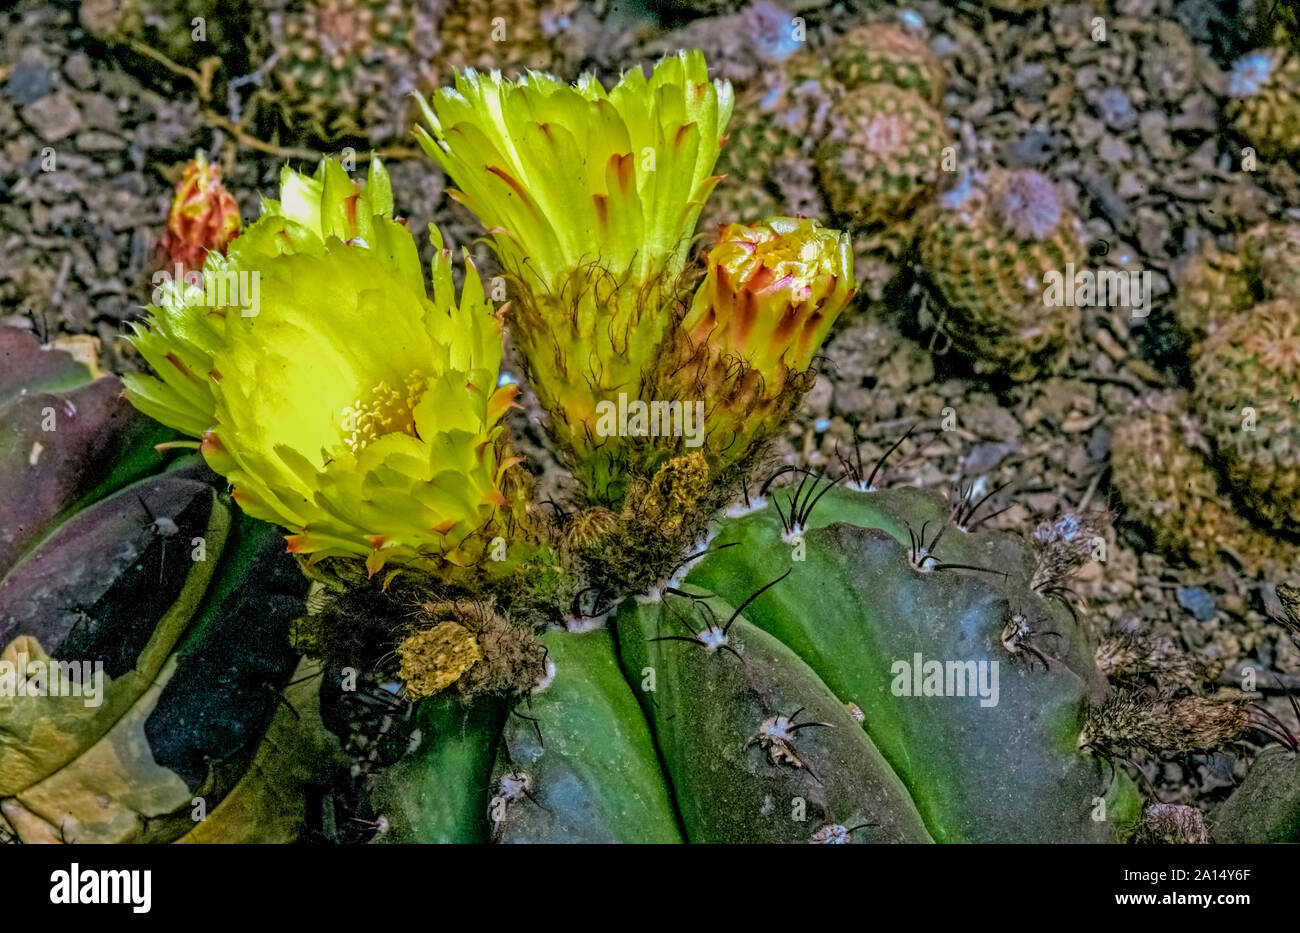 Cactus,Parodia magnifica,radial ,spines,bright,golden ,flowers,during,summer,origin,Brazil,cultivated at Kalimpong West Bengal.India. Stock Photo